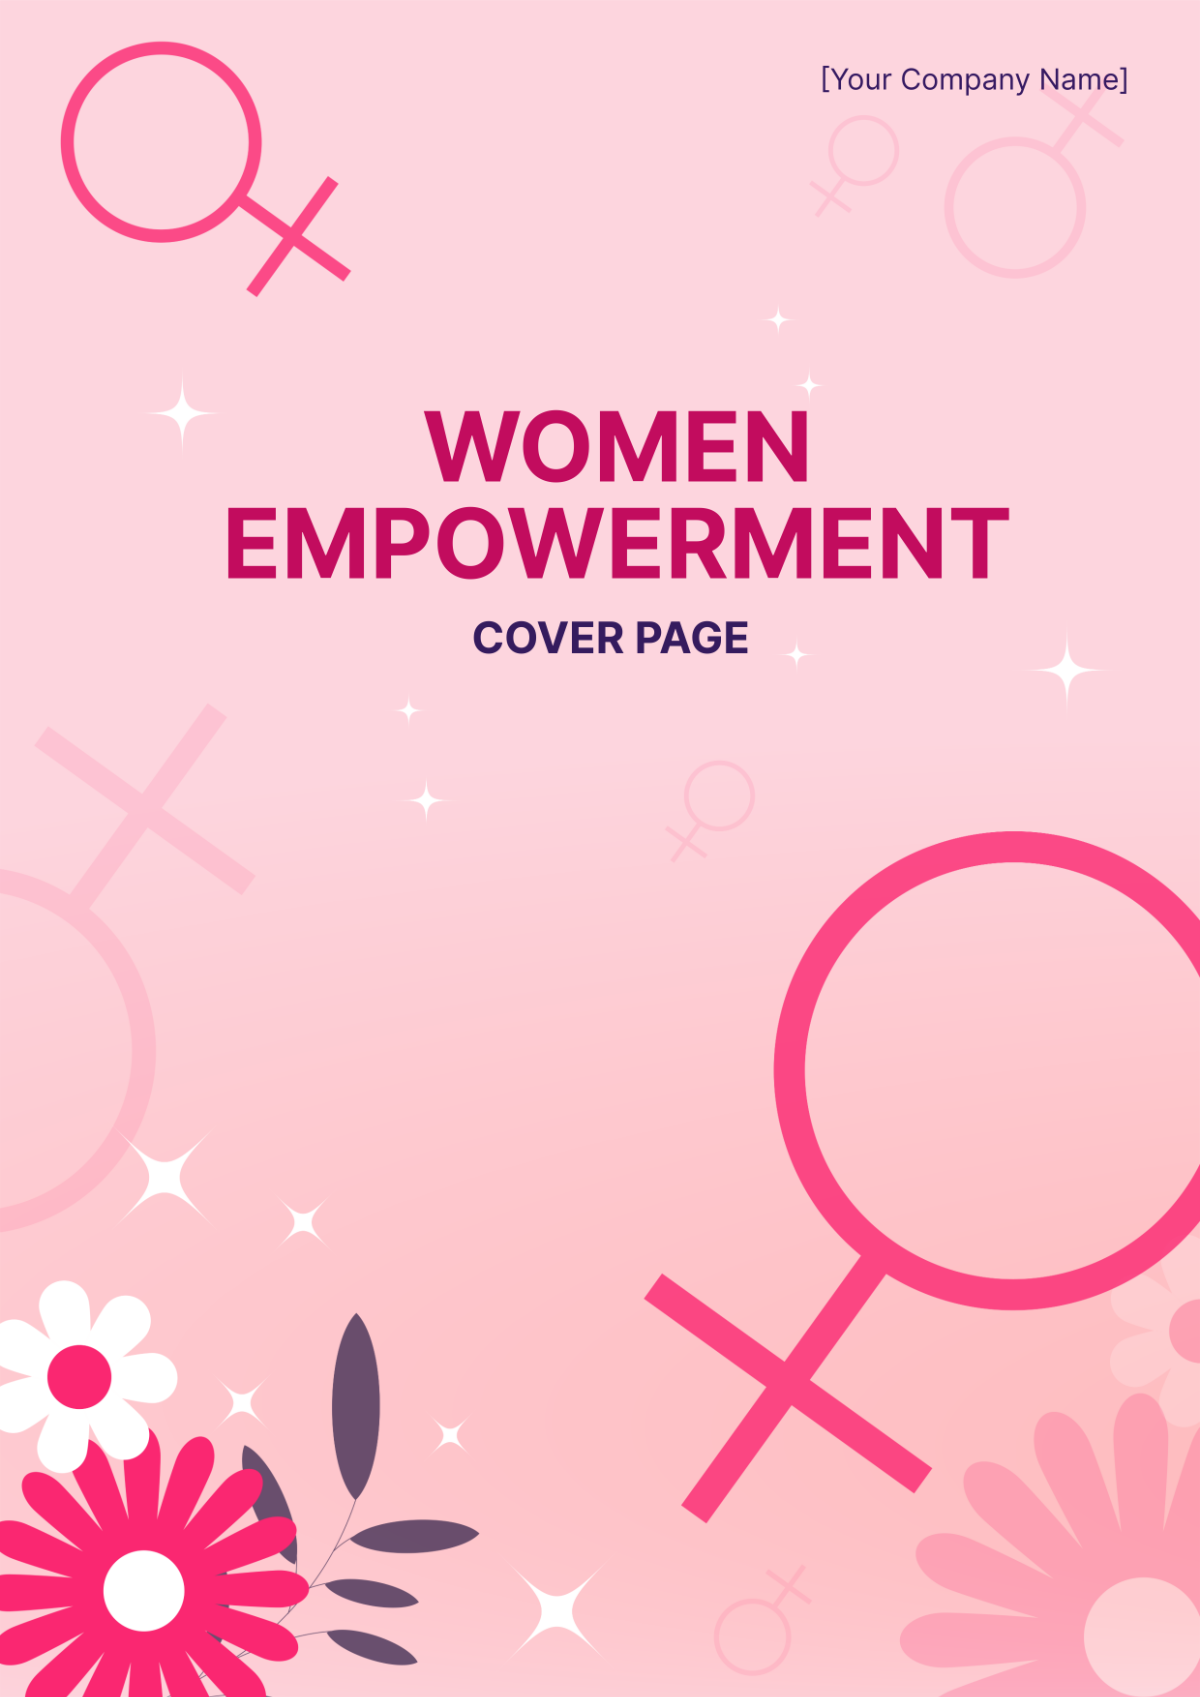 Women Empowerment Cover Page Template